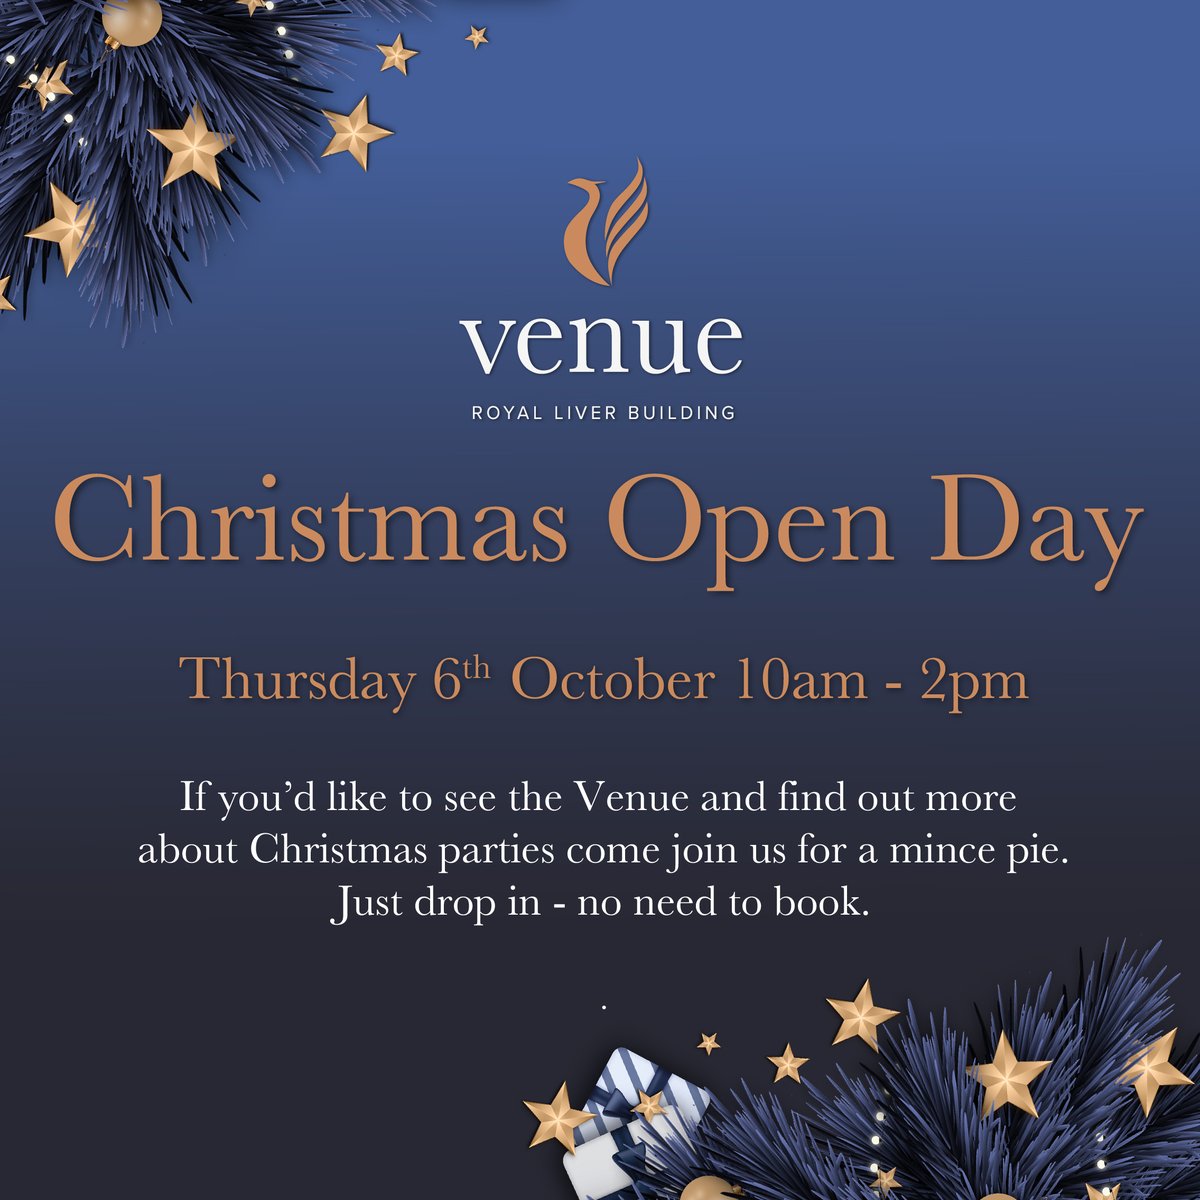 Our Christmas open day is tomorrow from 10am – 2pm. We’ll show you what we’re planning for Christmas, share menu ideas and you can meet the team to talk about your Christmas party. bit.ly/VenueChristmas